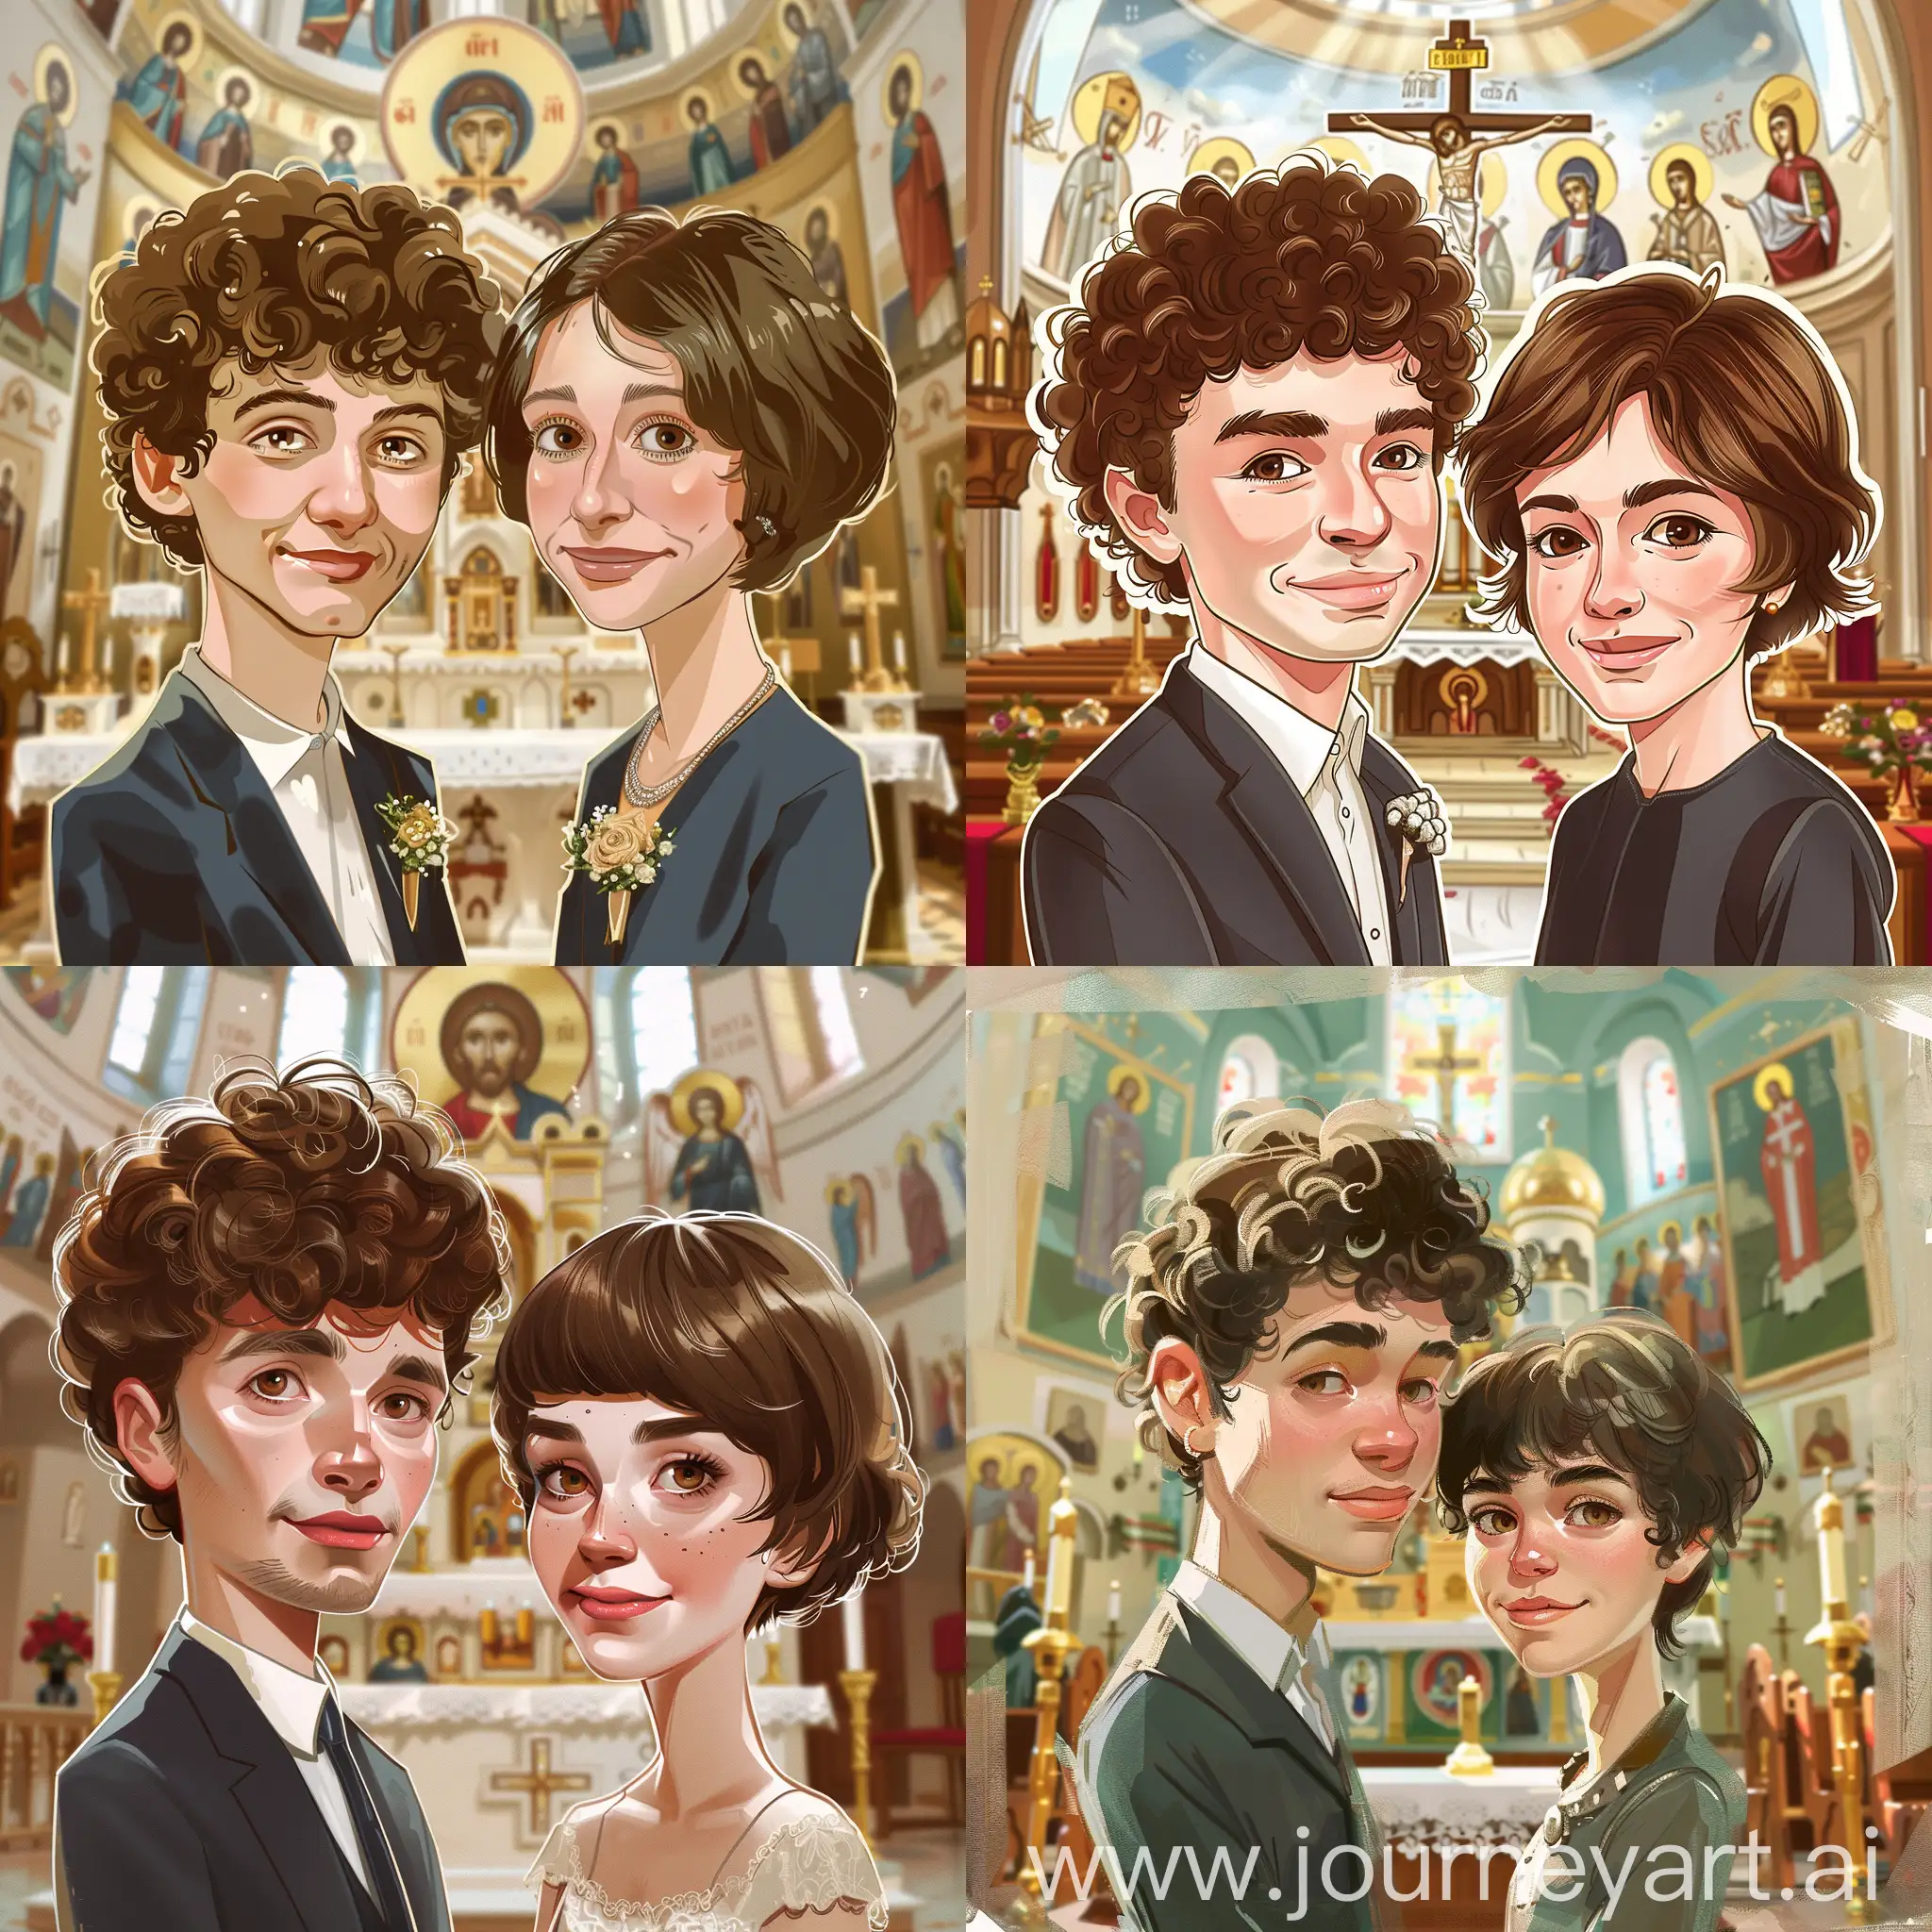 Cute cartoonish caricatures of a young couple getting married in a front of the alter inside of a Serbian Orthodox Church. The young man has brown curly hair and the young woman has short brown hair.